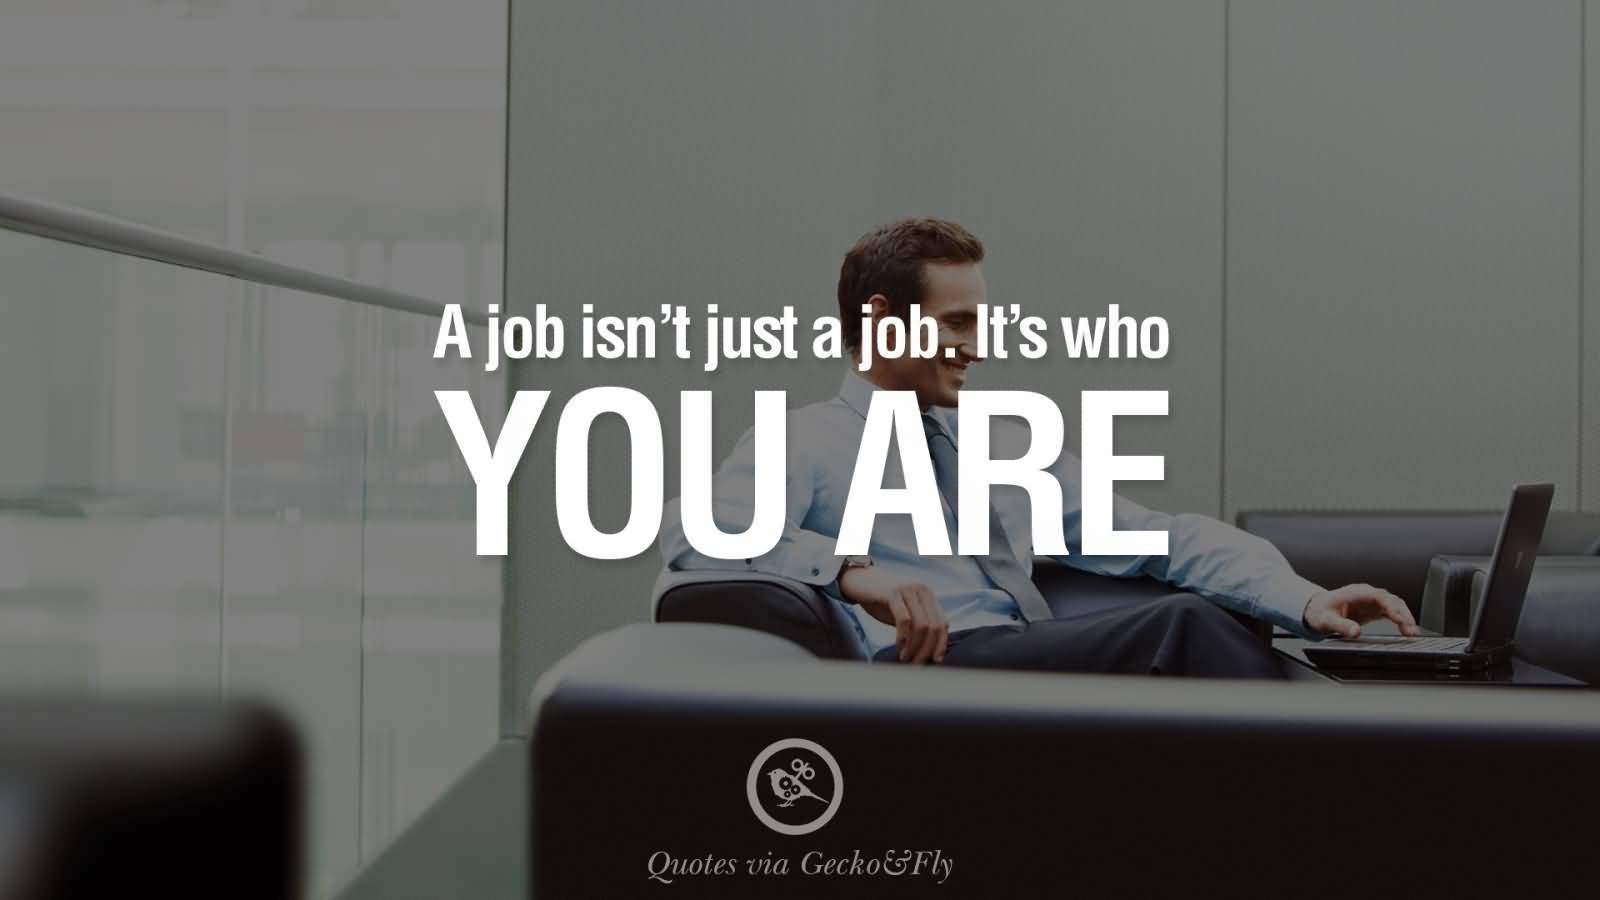 A job isn't just a job. It's who you are.